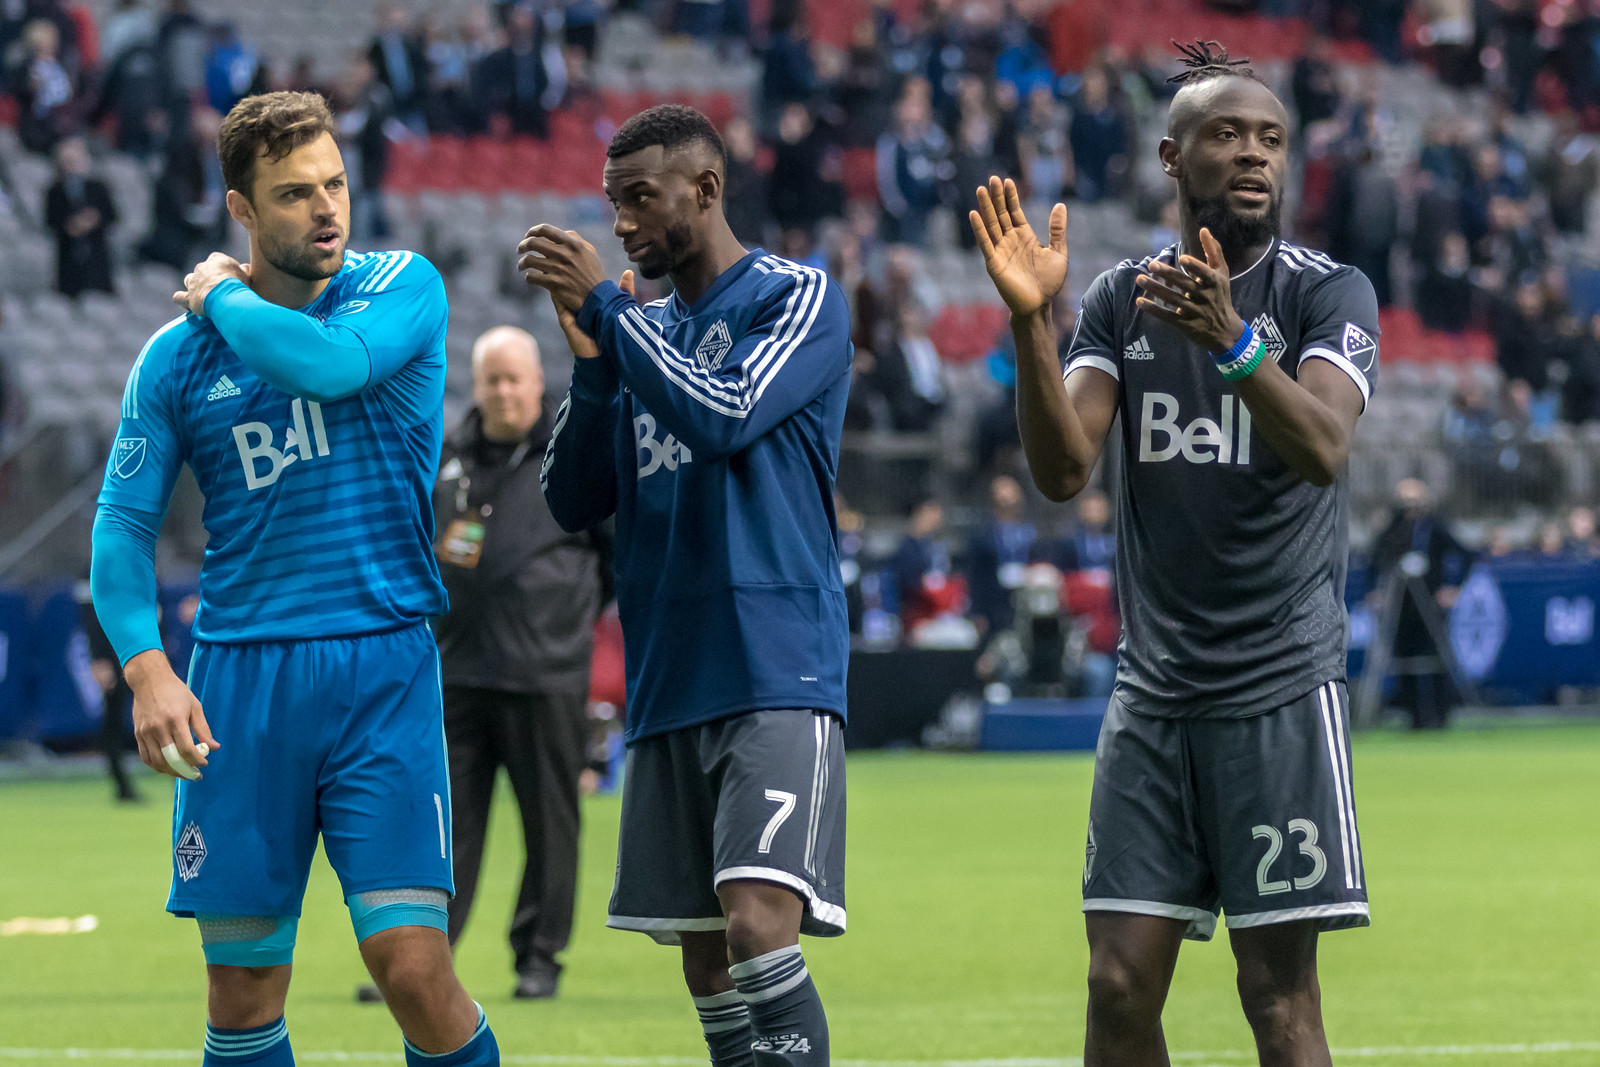 March 4th, 2018 - MLS - Montreal Impact at Vancouver Whitecaps FC